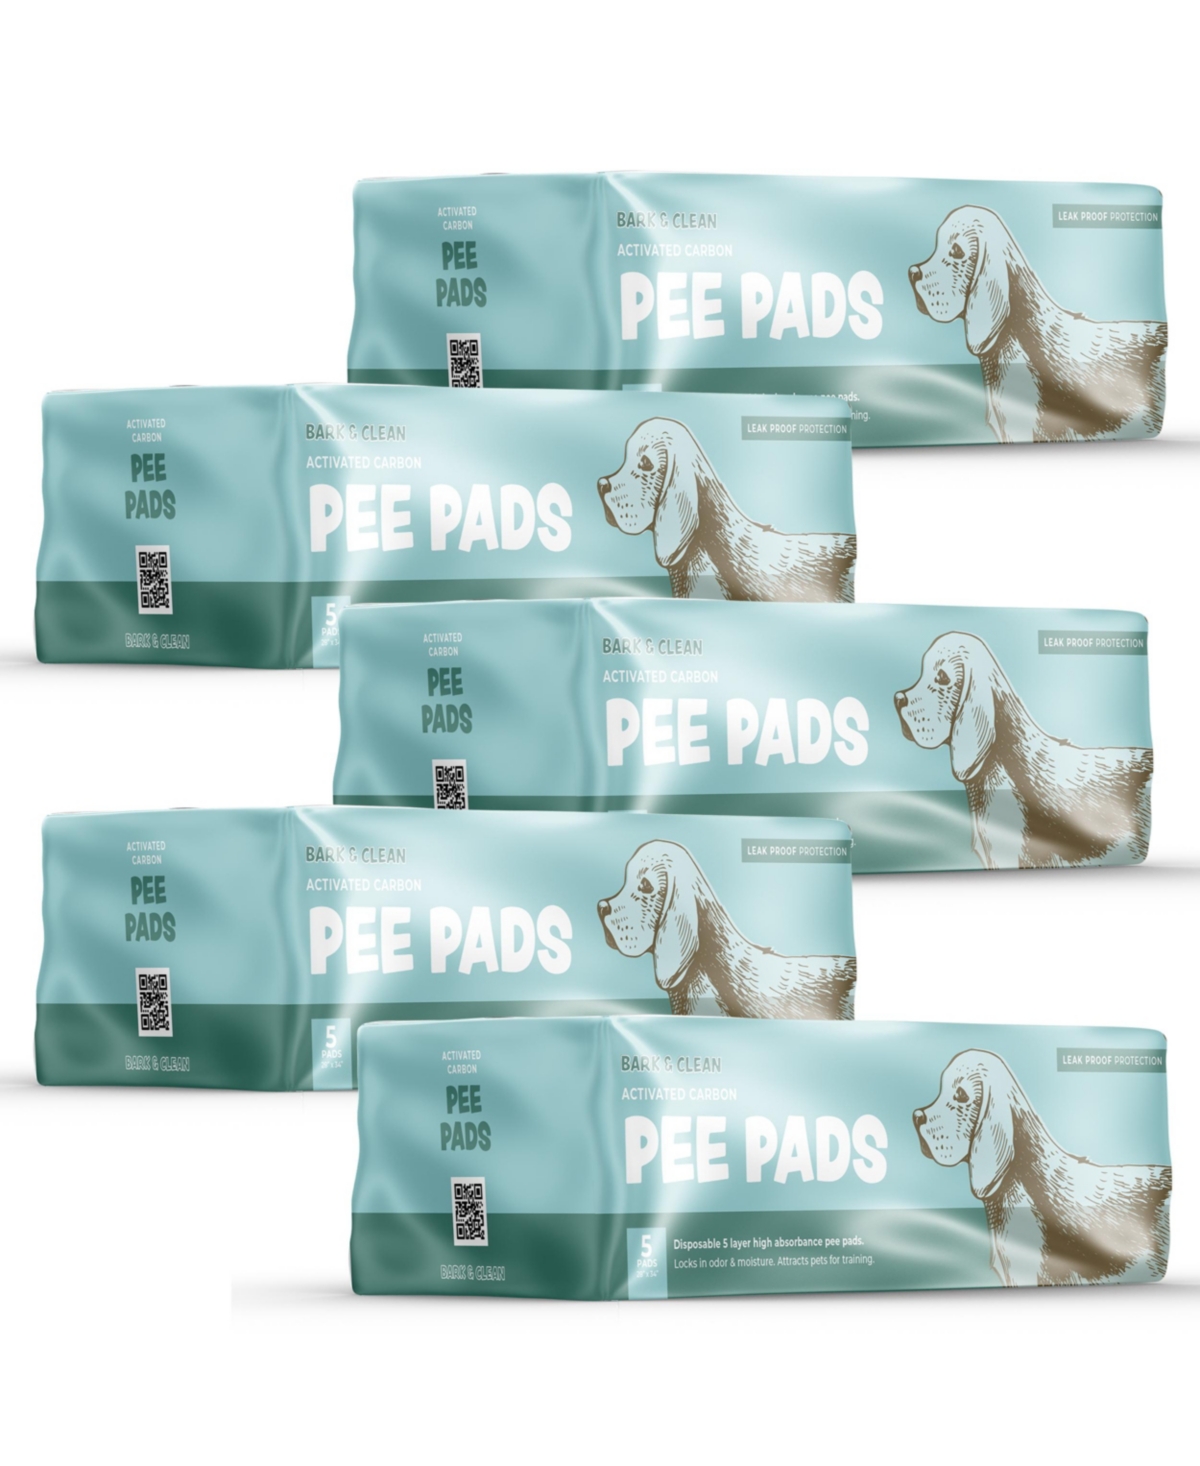 Traveler's Dog and Puppy Pee Pads, Leak-Proof Design, Heavy Duty Absorbency, 28" x 34", 5 Packs of 5 Pads - Charcoal